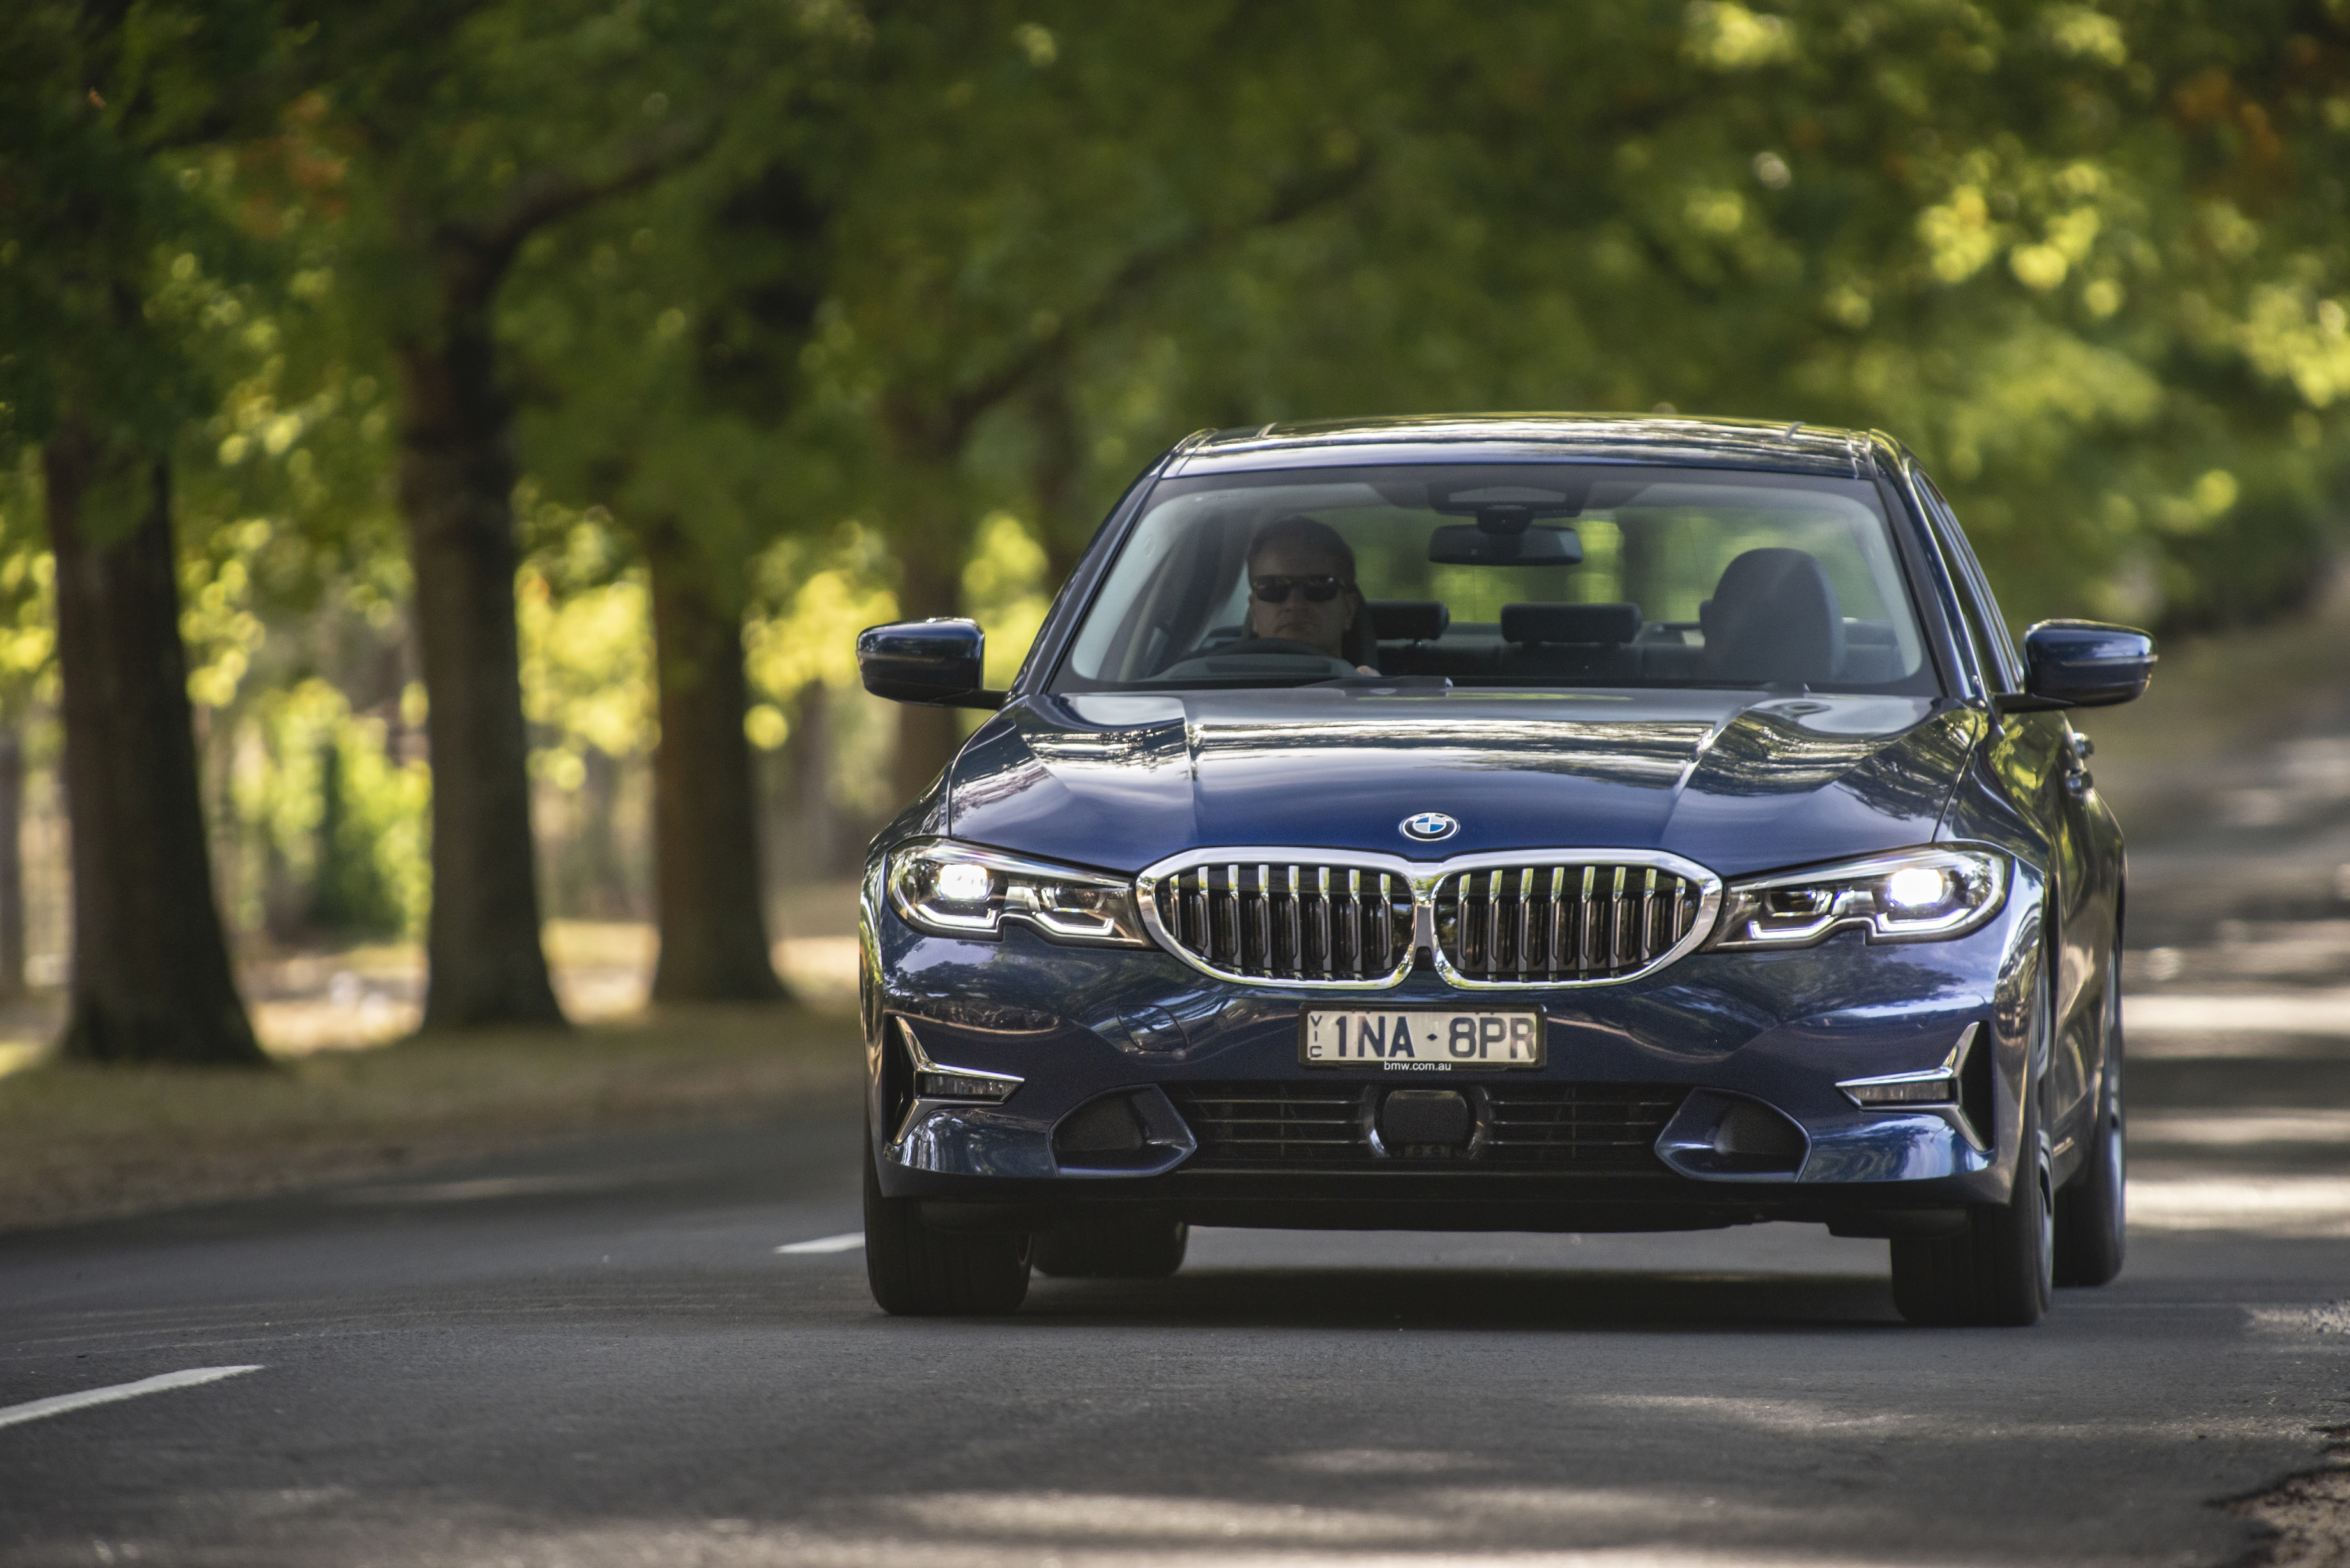 BMW latest generation 330i sedan - much improved but with a sporty ride